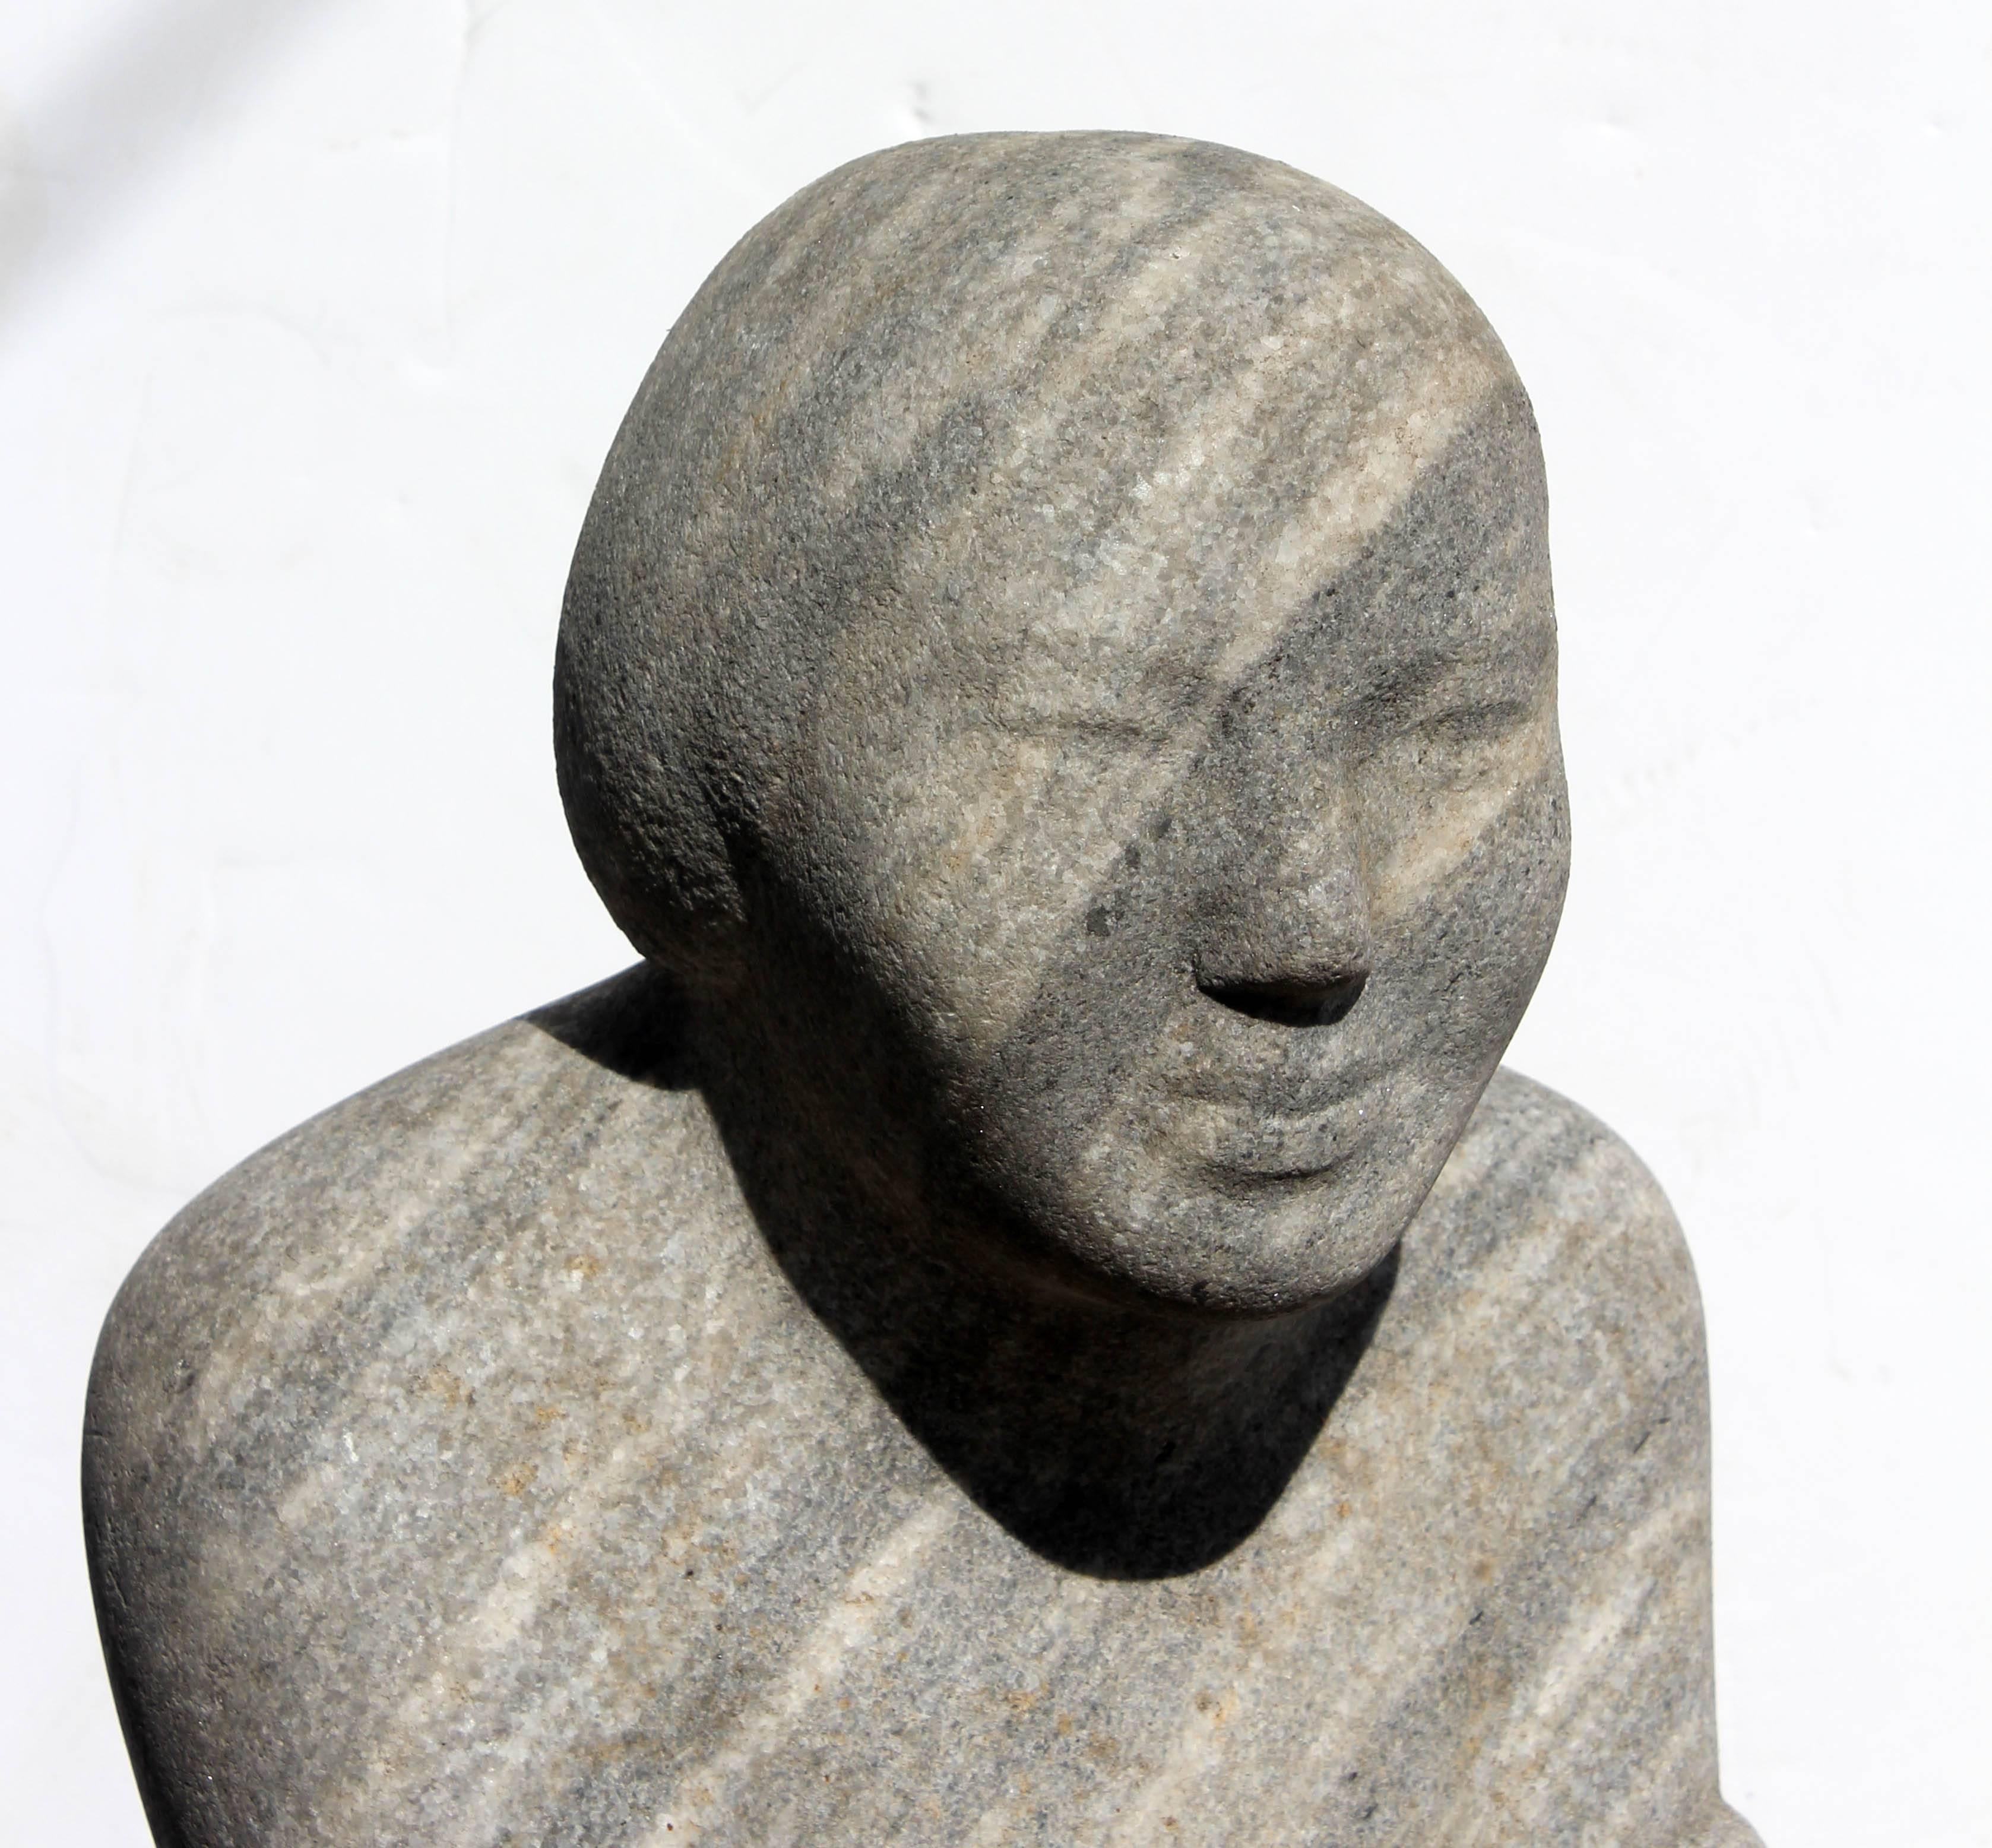 Modernist variegated carved granite sculpture of a young boy by Arnold Epp (Ohio 1914-1987). Two other works available.  Epp studied sculpture at the Ohio State University where he received a B.F.A. and M.A. and studied at the Art Students League in